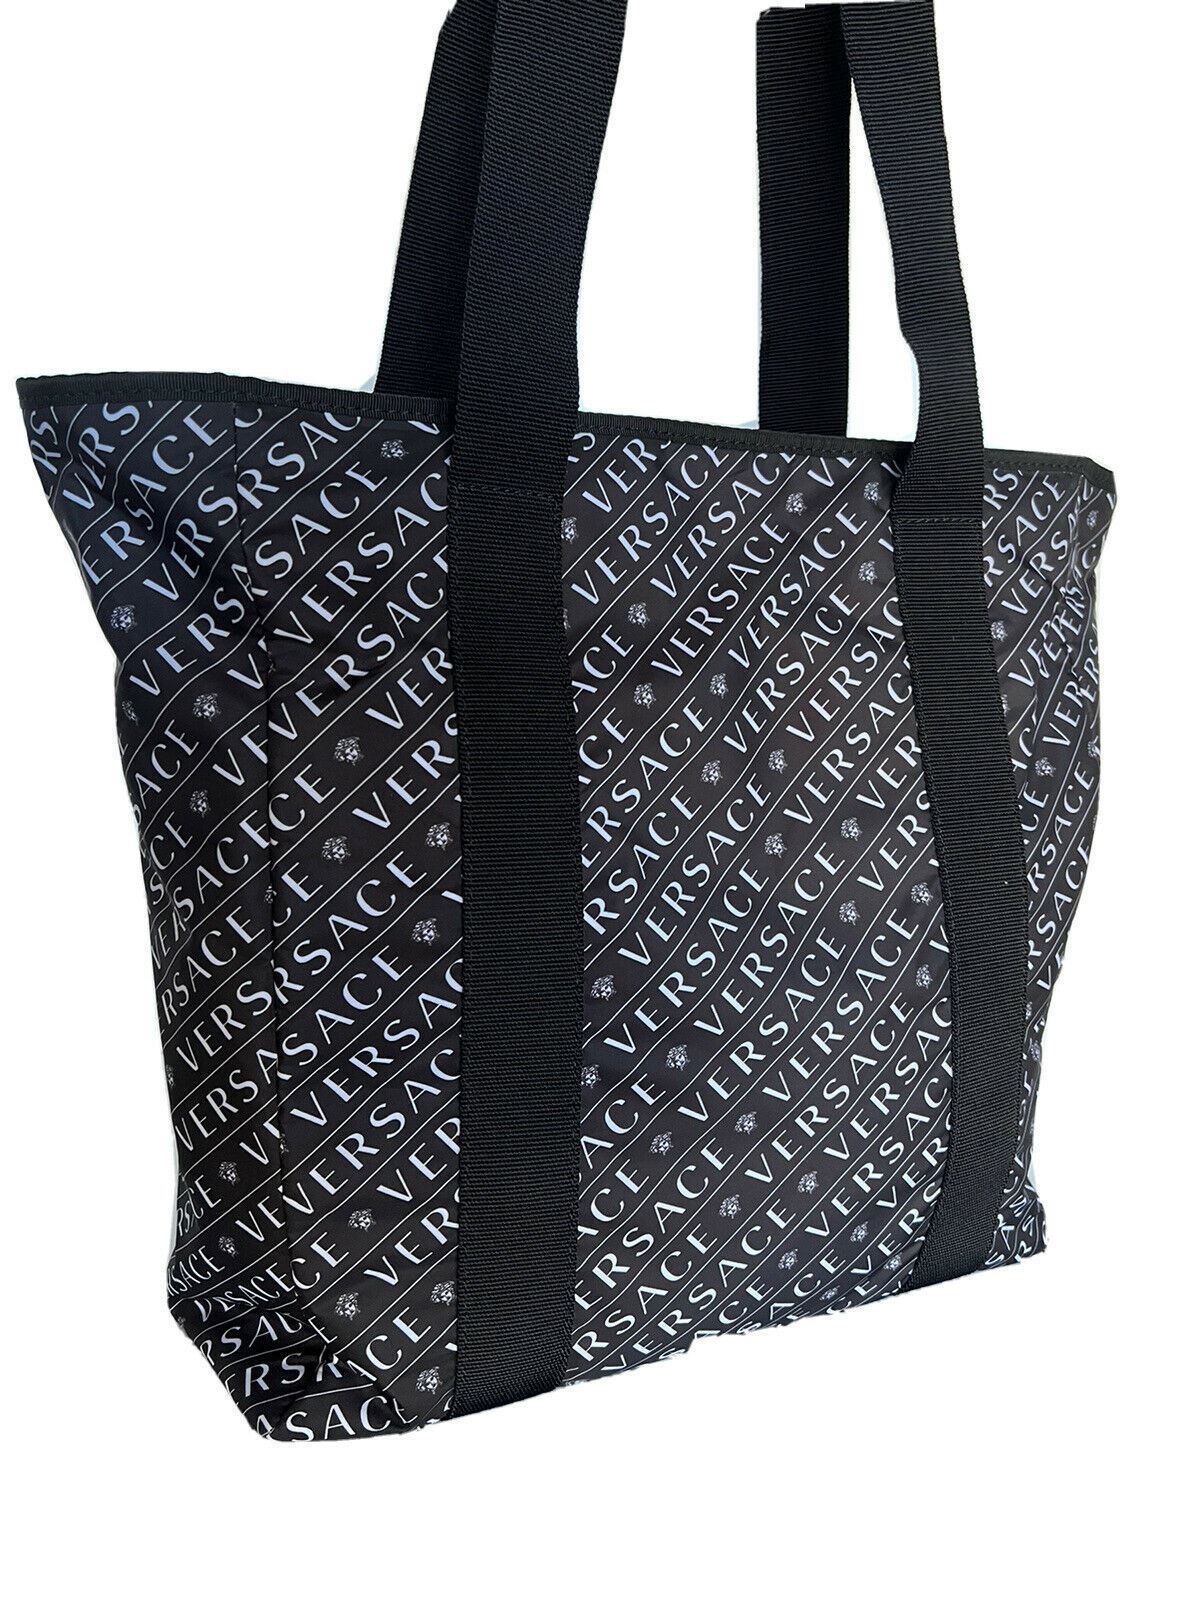 New Versace Black & White Logo Nylon Light Weight Tote Bag Made in Italy DFB8121